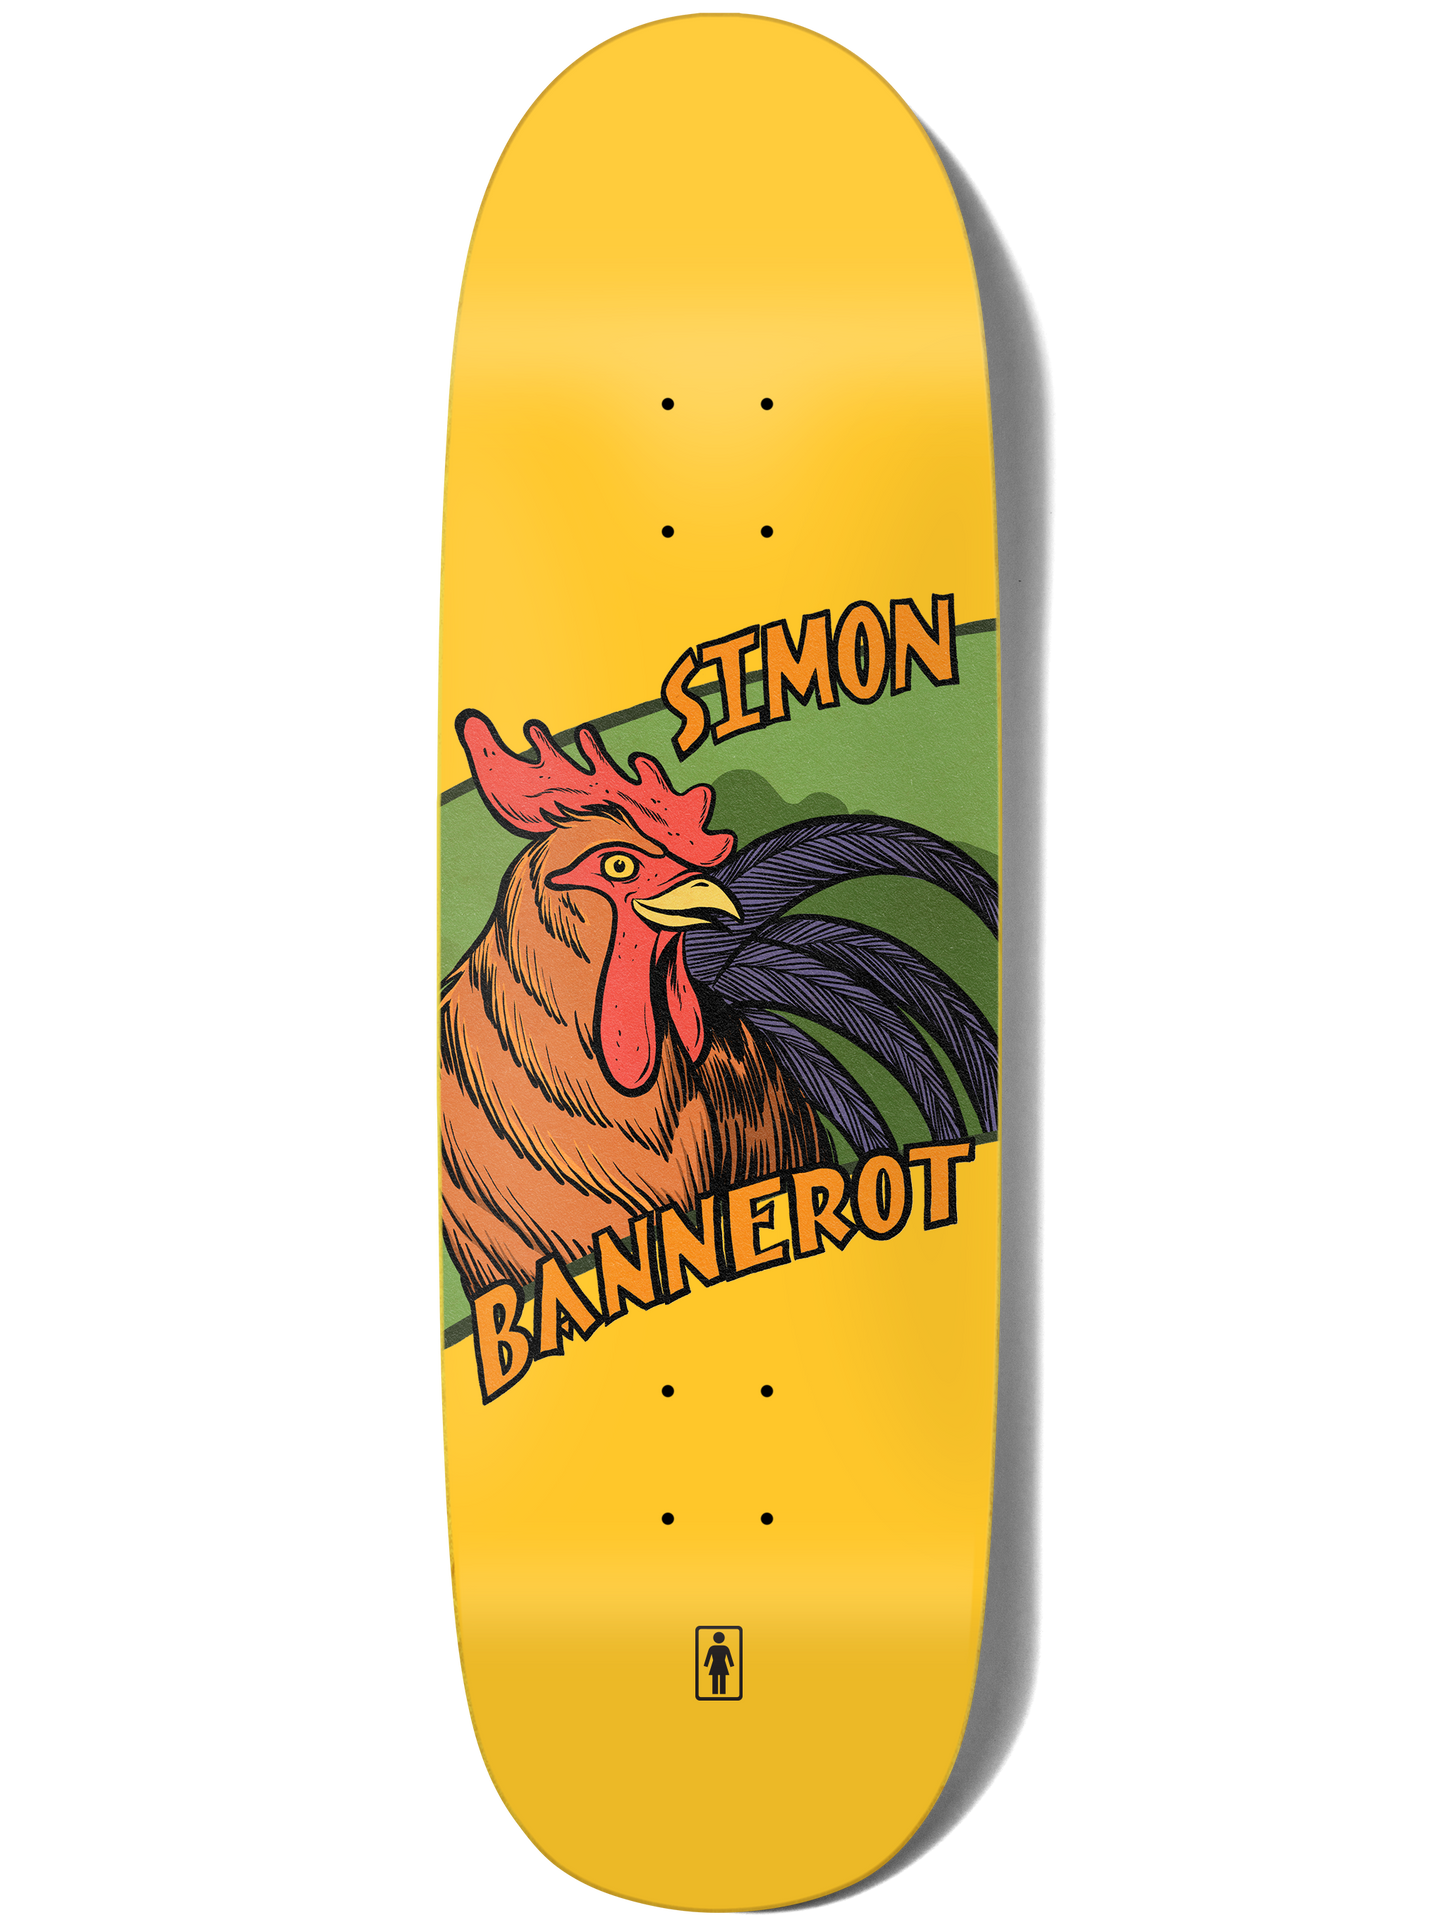 GIRL Bannerot Rooster Couch Deck 9.25"